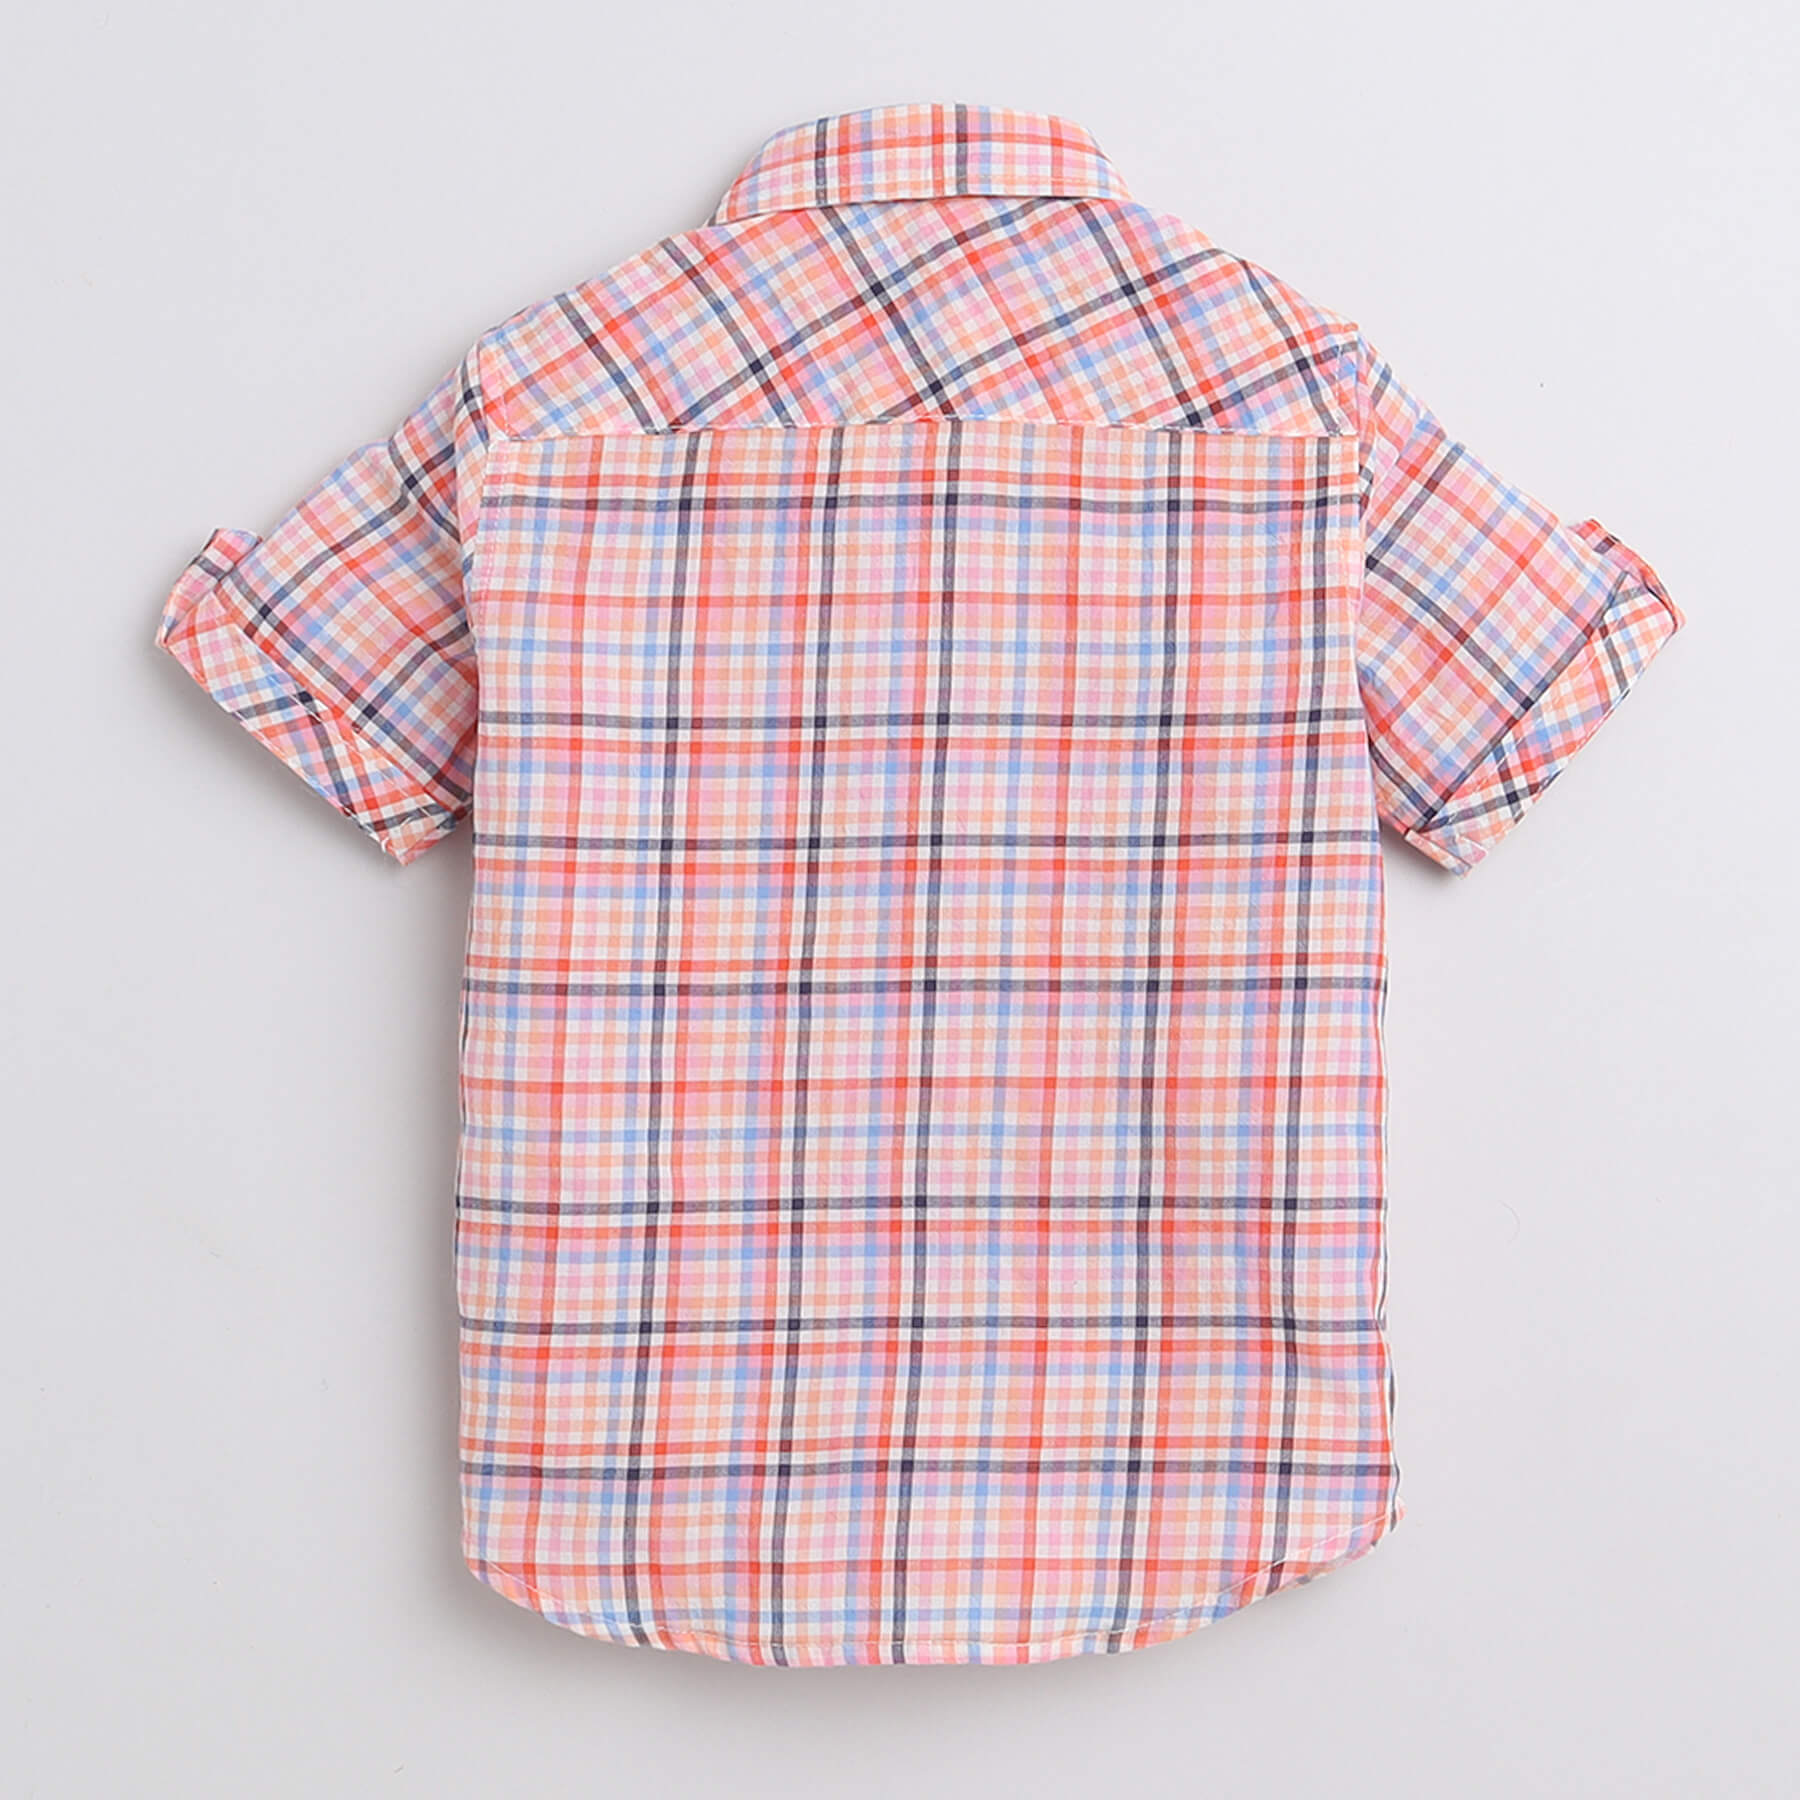 Taffykids checks printed half sleeves shirt with attached tee - Multi